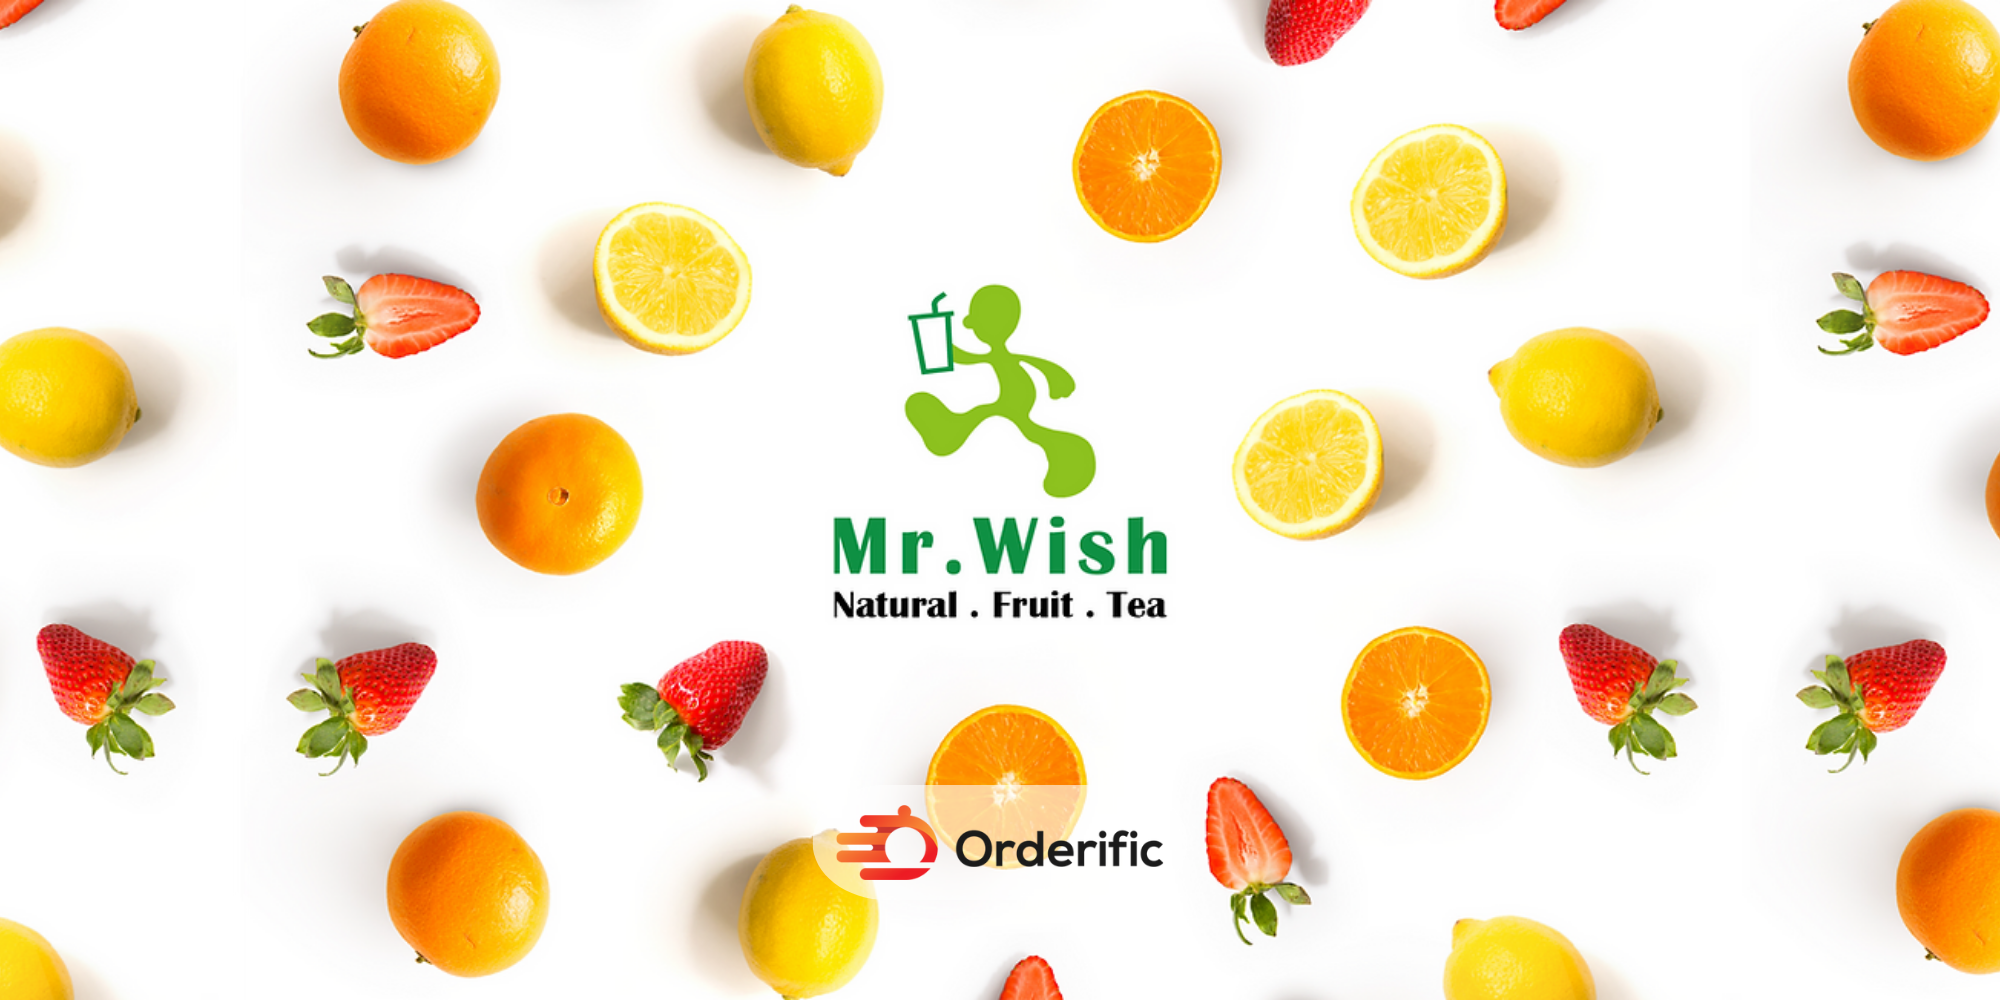 Mr. Wish for Refreshing Beverages